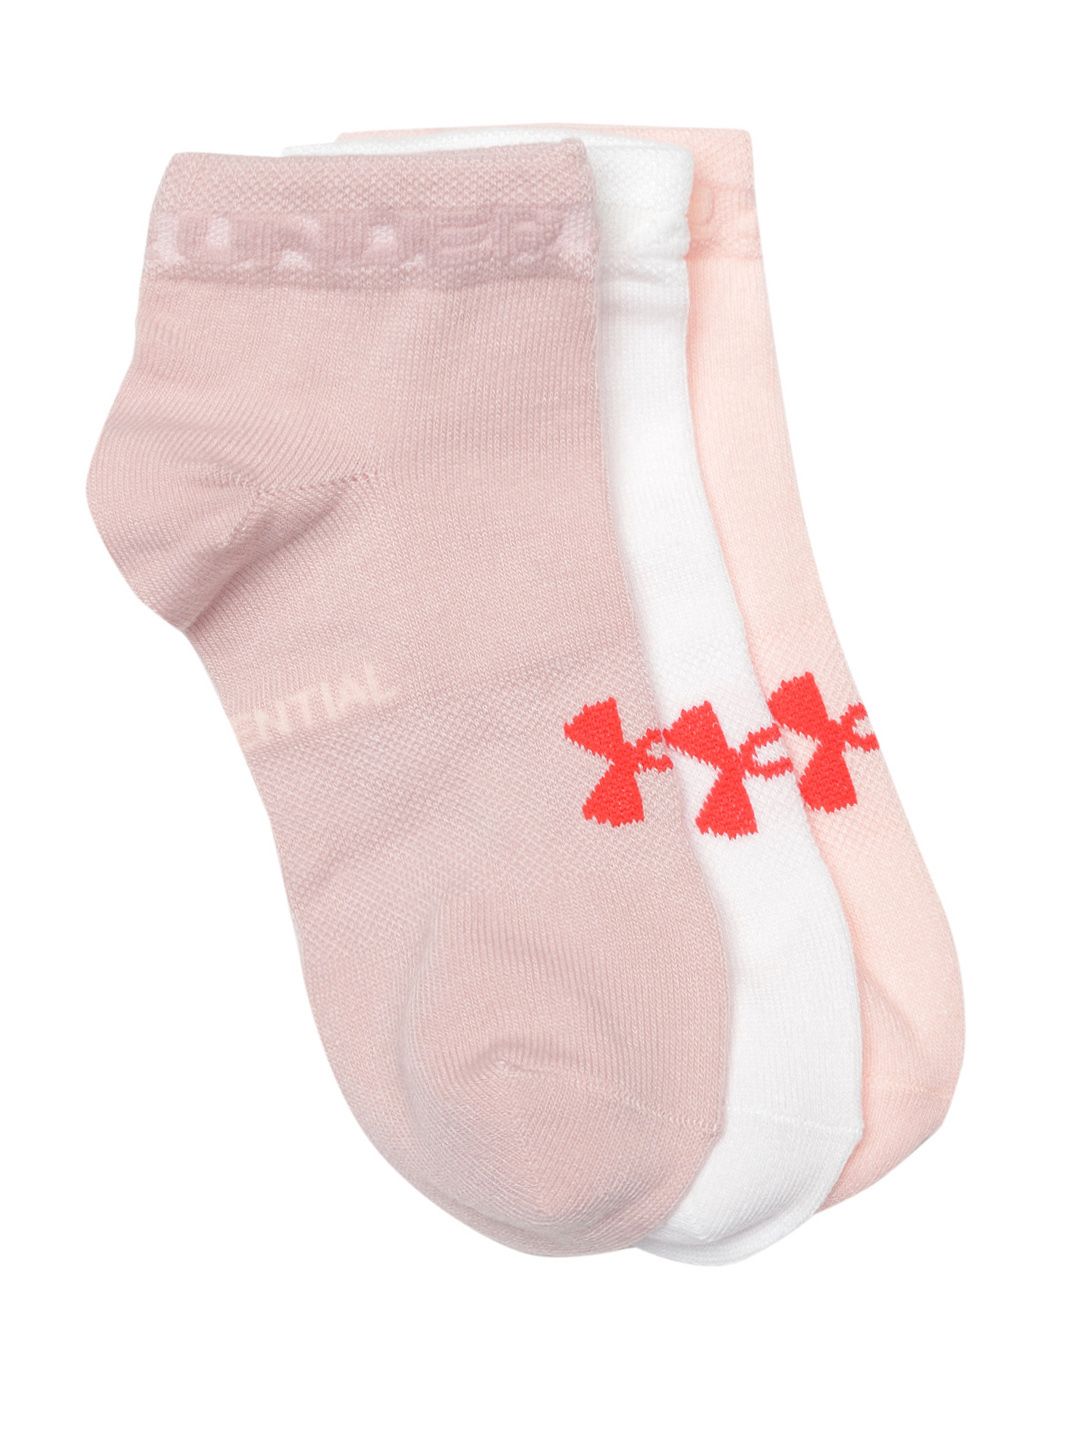 UNDER ARMOUR Unisex Pack of 3 Brand Logo Patterned Essential Low Cut Ankle Length Socks Price in India